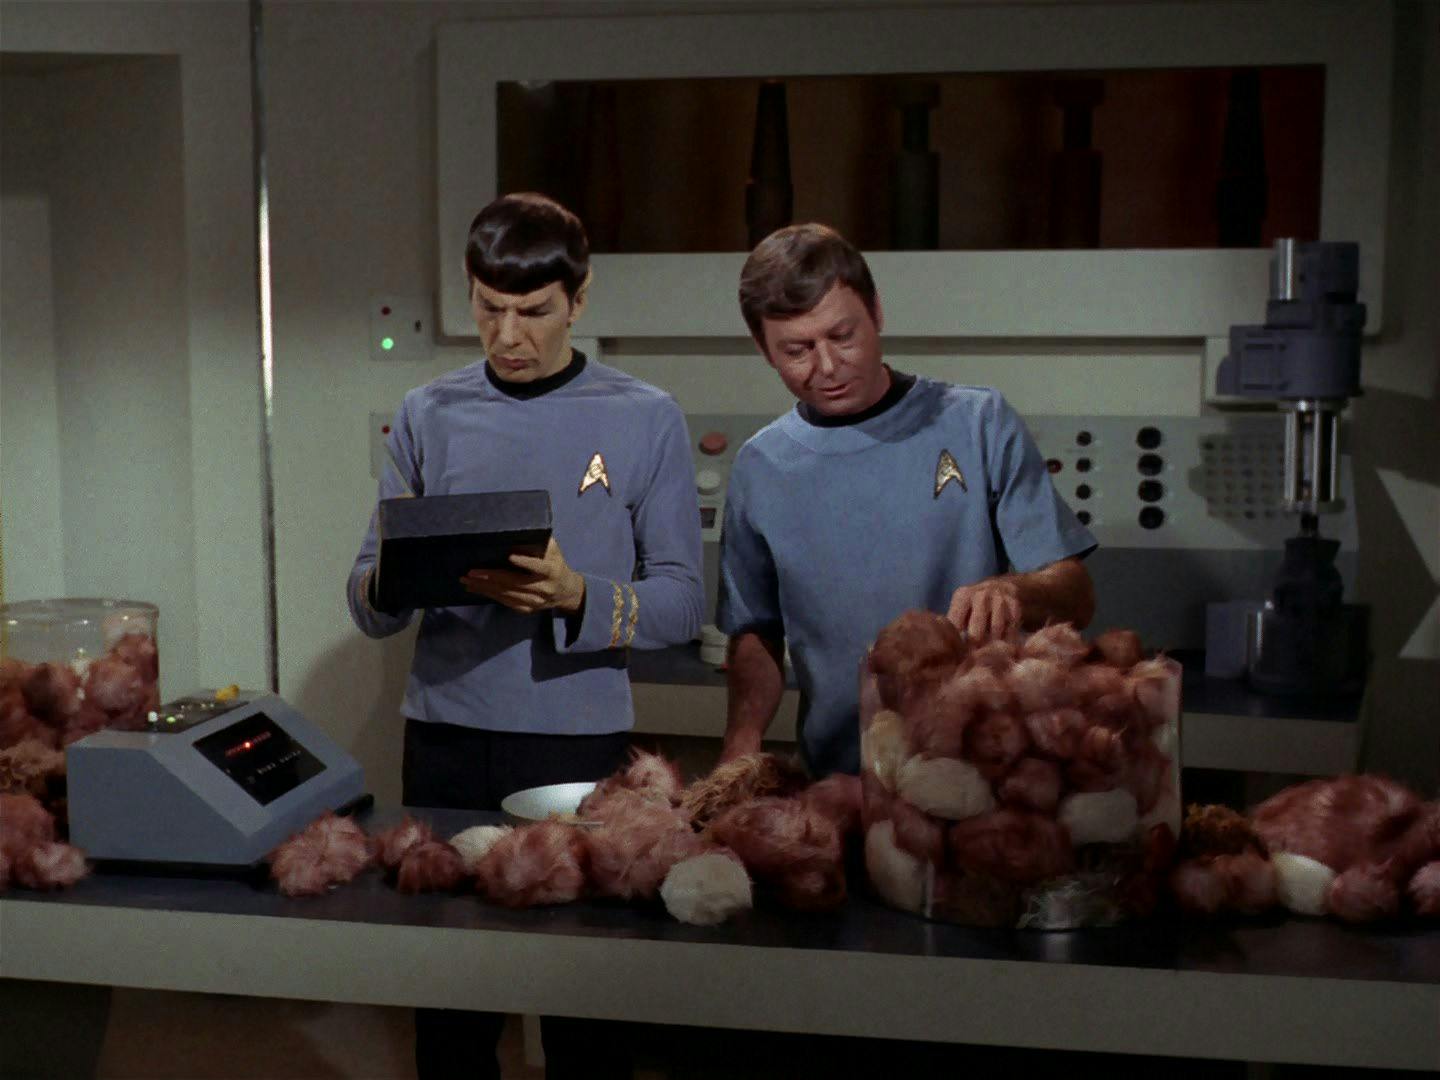 In the science lab, as Spock takes notes on his pad, McCoy looks over and hands the pile of Tribbles in front of them in 'The Trouble with Tribbles'